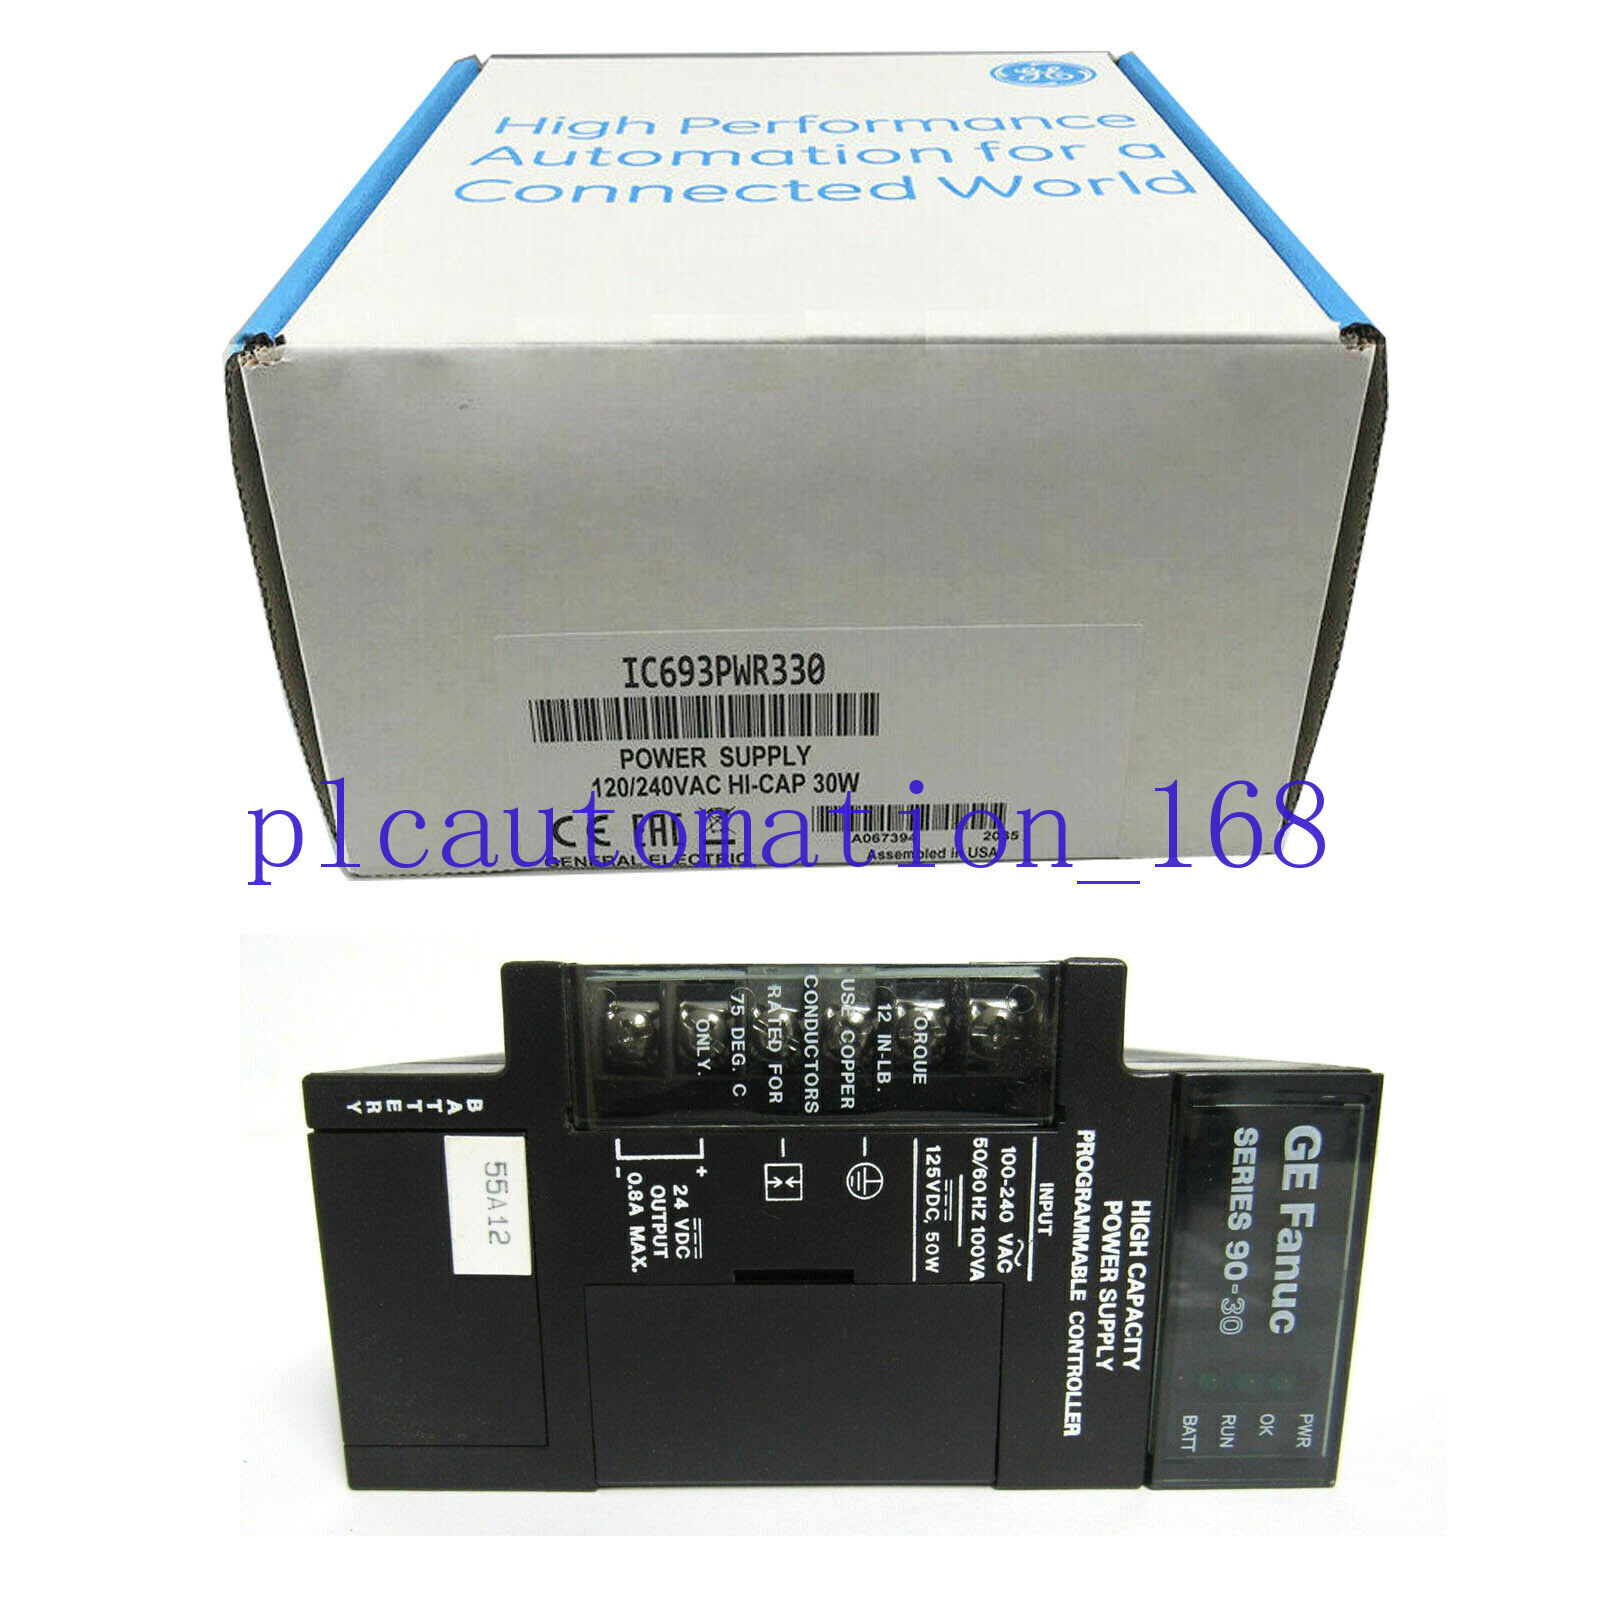 New In Box GE FANUC IC693PWR330 IC693PWR330E Power Supply Unit